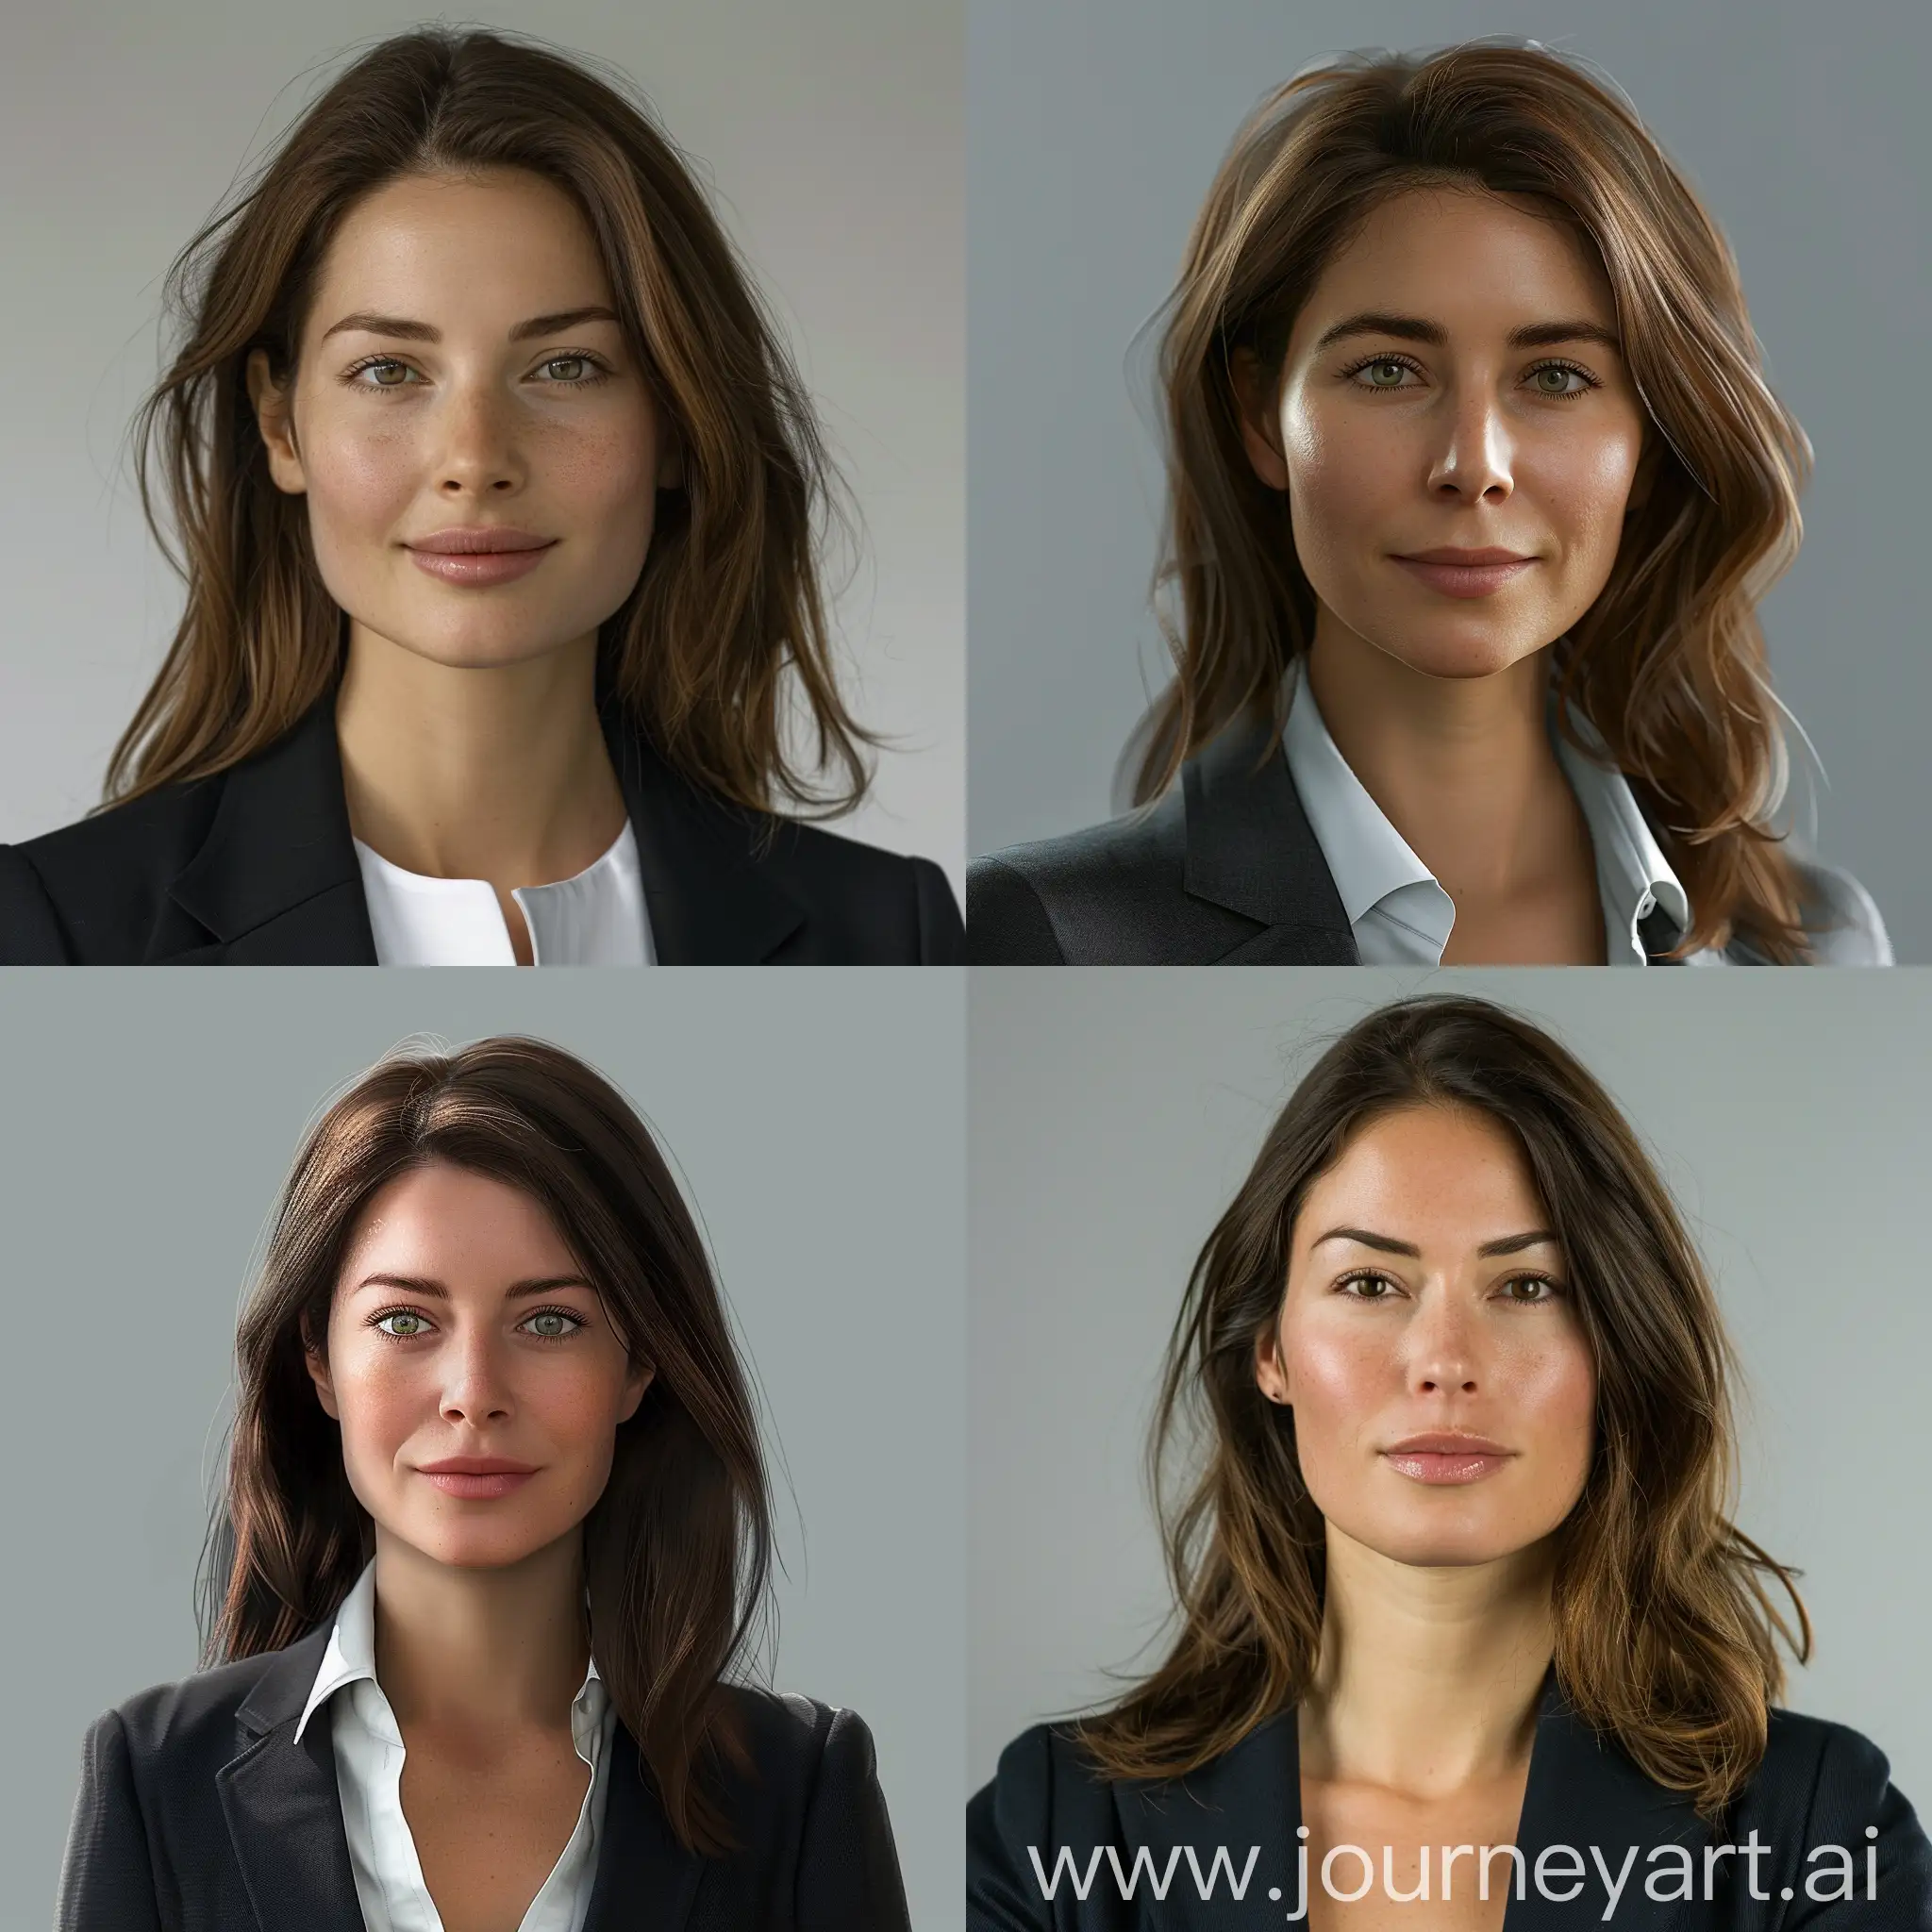 Profile photo of a personal assistant to the manager of Waltham Abbey football club. She is of British origin, in her early thirties, businesswomen looking. In the style of facepack for game football manager 22. White skin, brown hair.